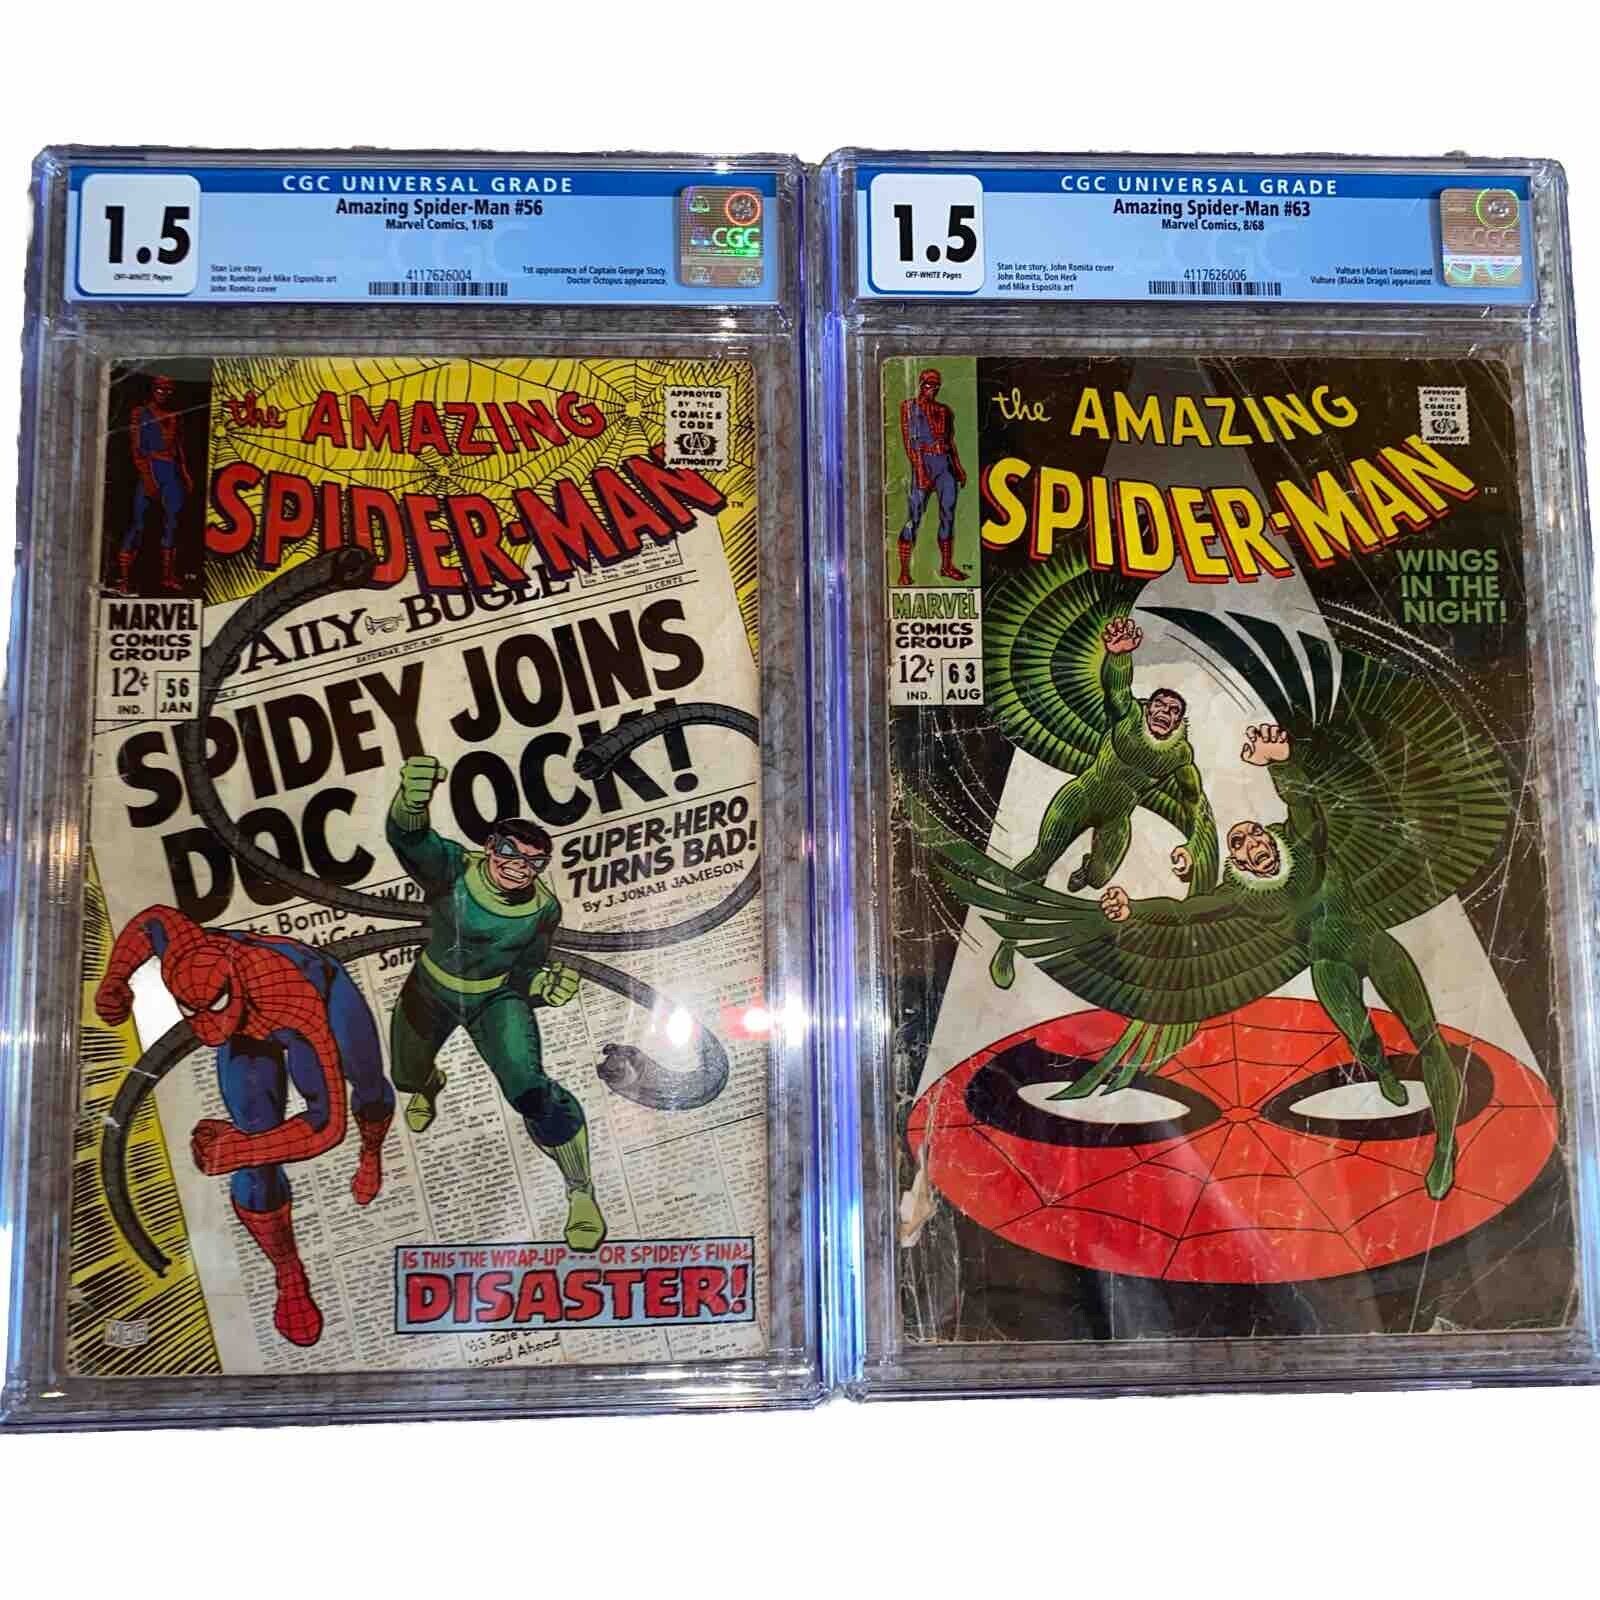 AMAZING SPIDER-MAN #56 & #63 CGC 1.5 OFF-WHITE PAGES 1st app George Stacy key